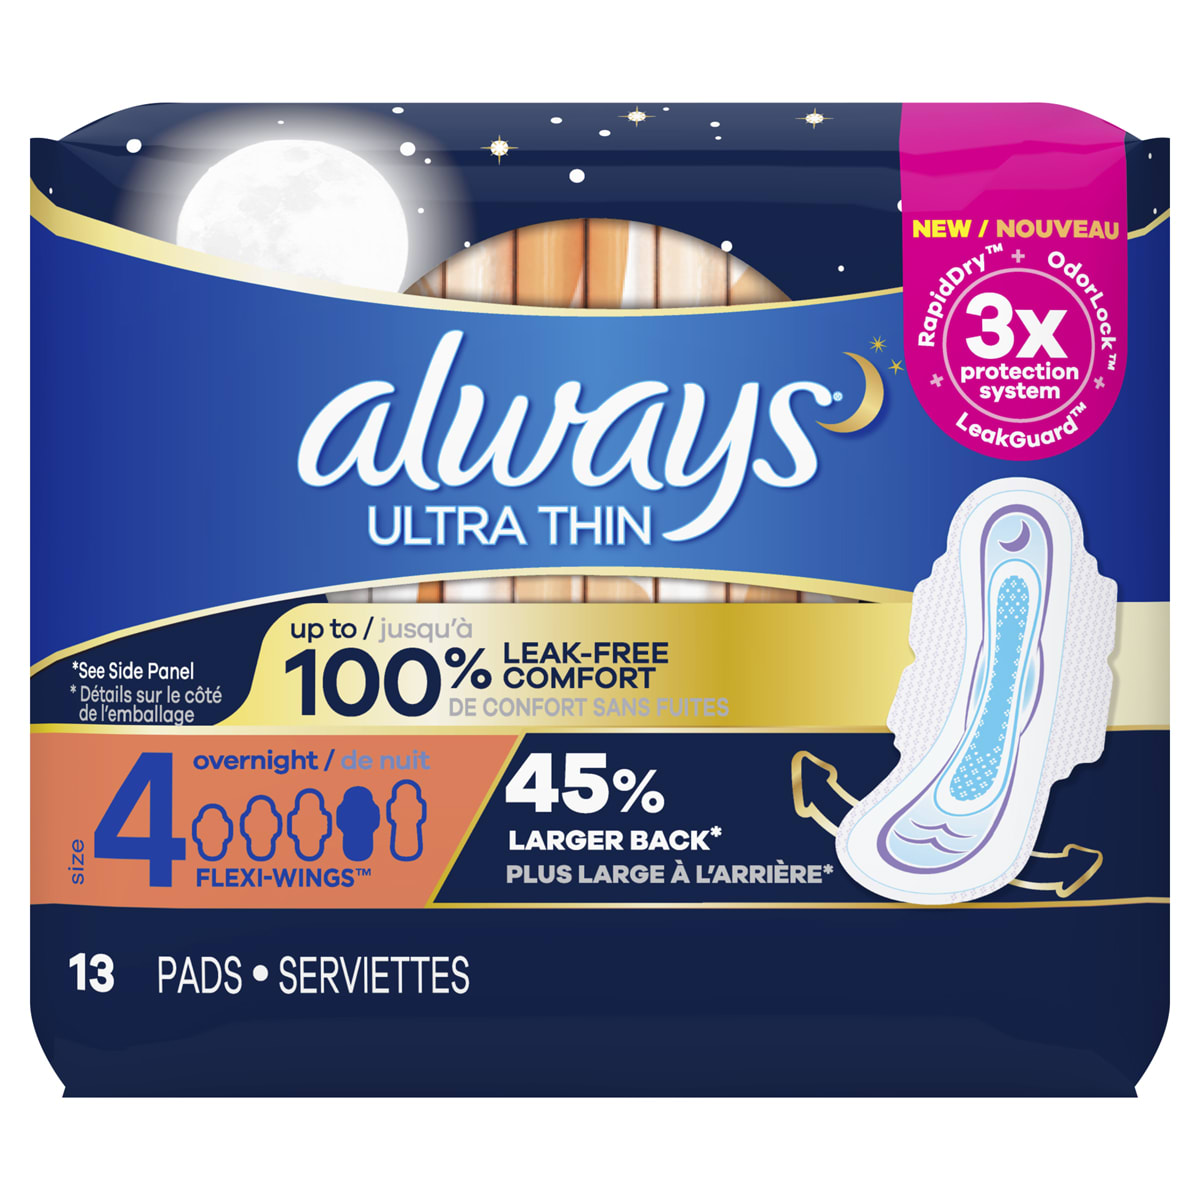  Always Radiant Teen Pads Get Real Regular Unscented w/Wings -  14ct : Health & Household